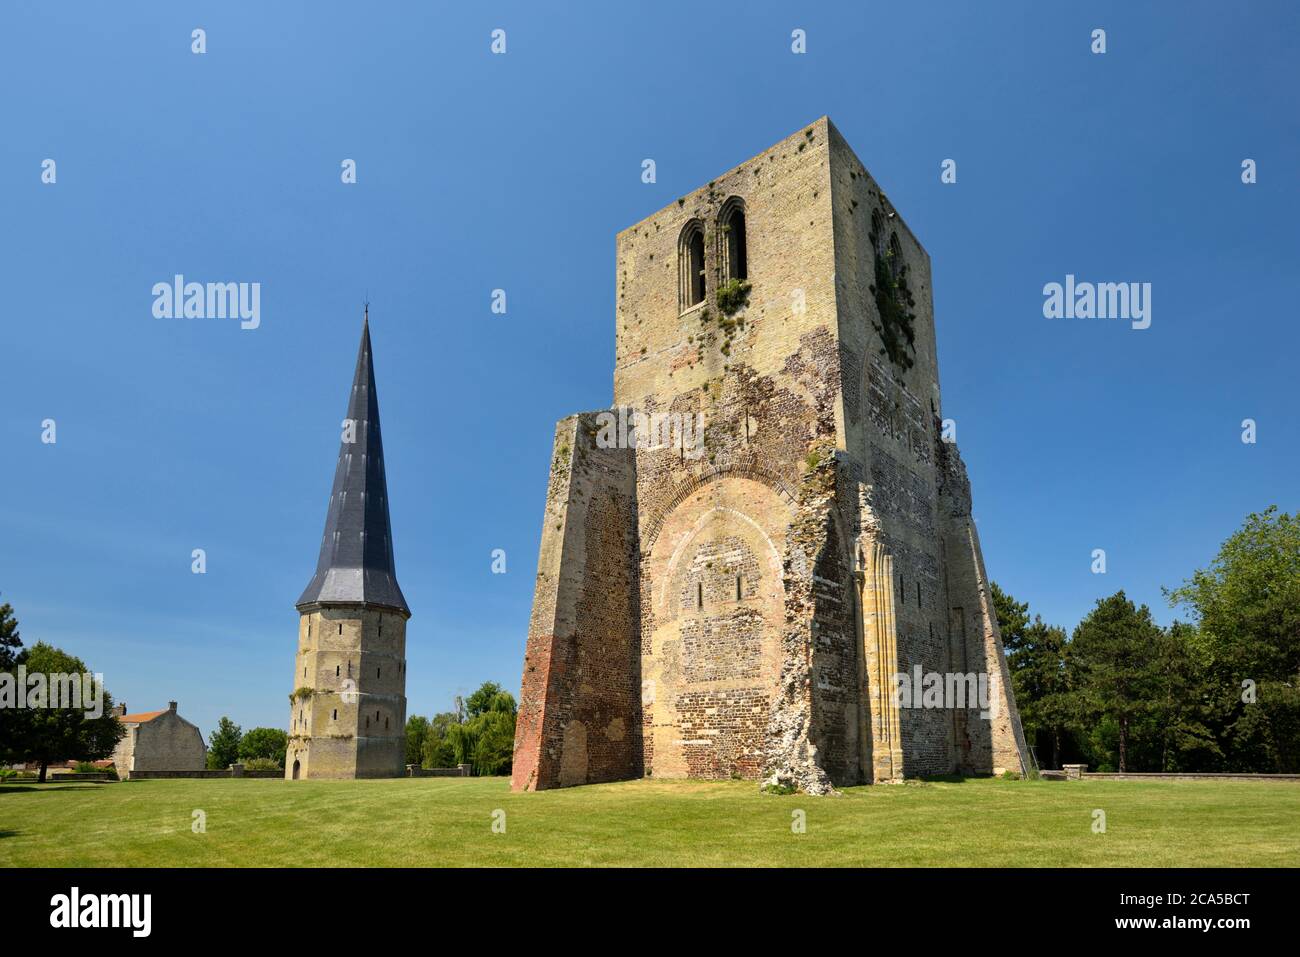 France, Nord, Bergues, tower pointue et tower carree from the 12 century vestige of the Abbey of Saint Winoc destroyed in 1789 Stock Photo